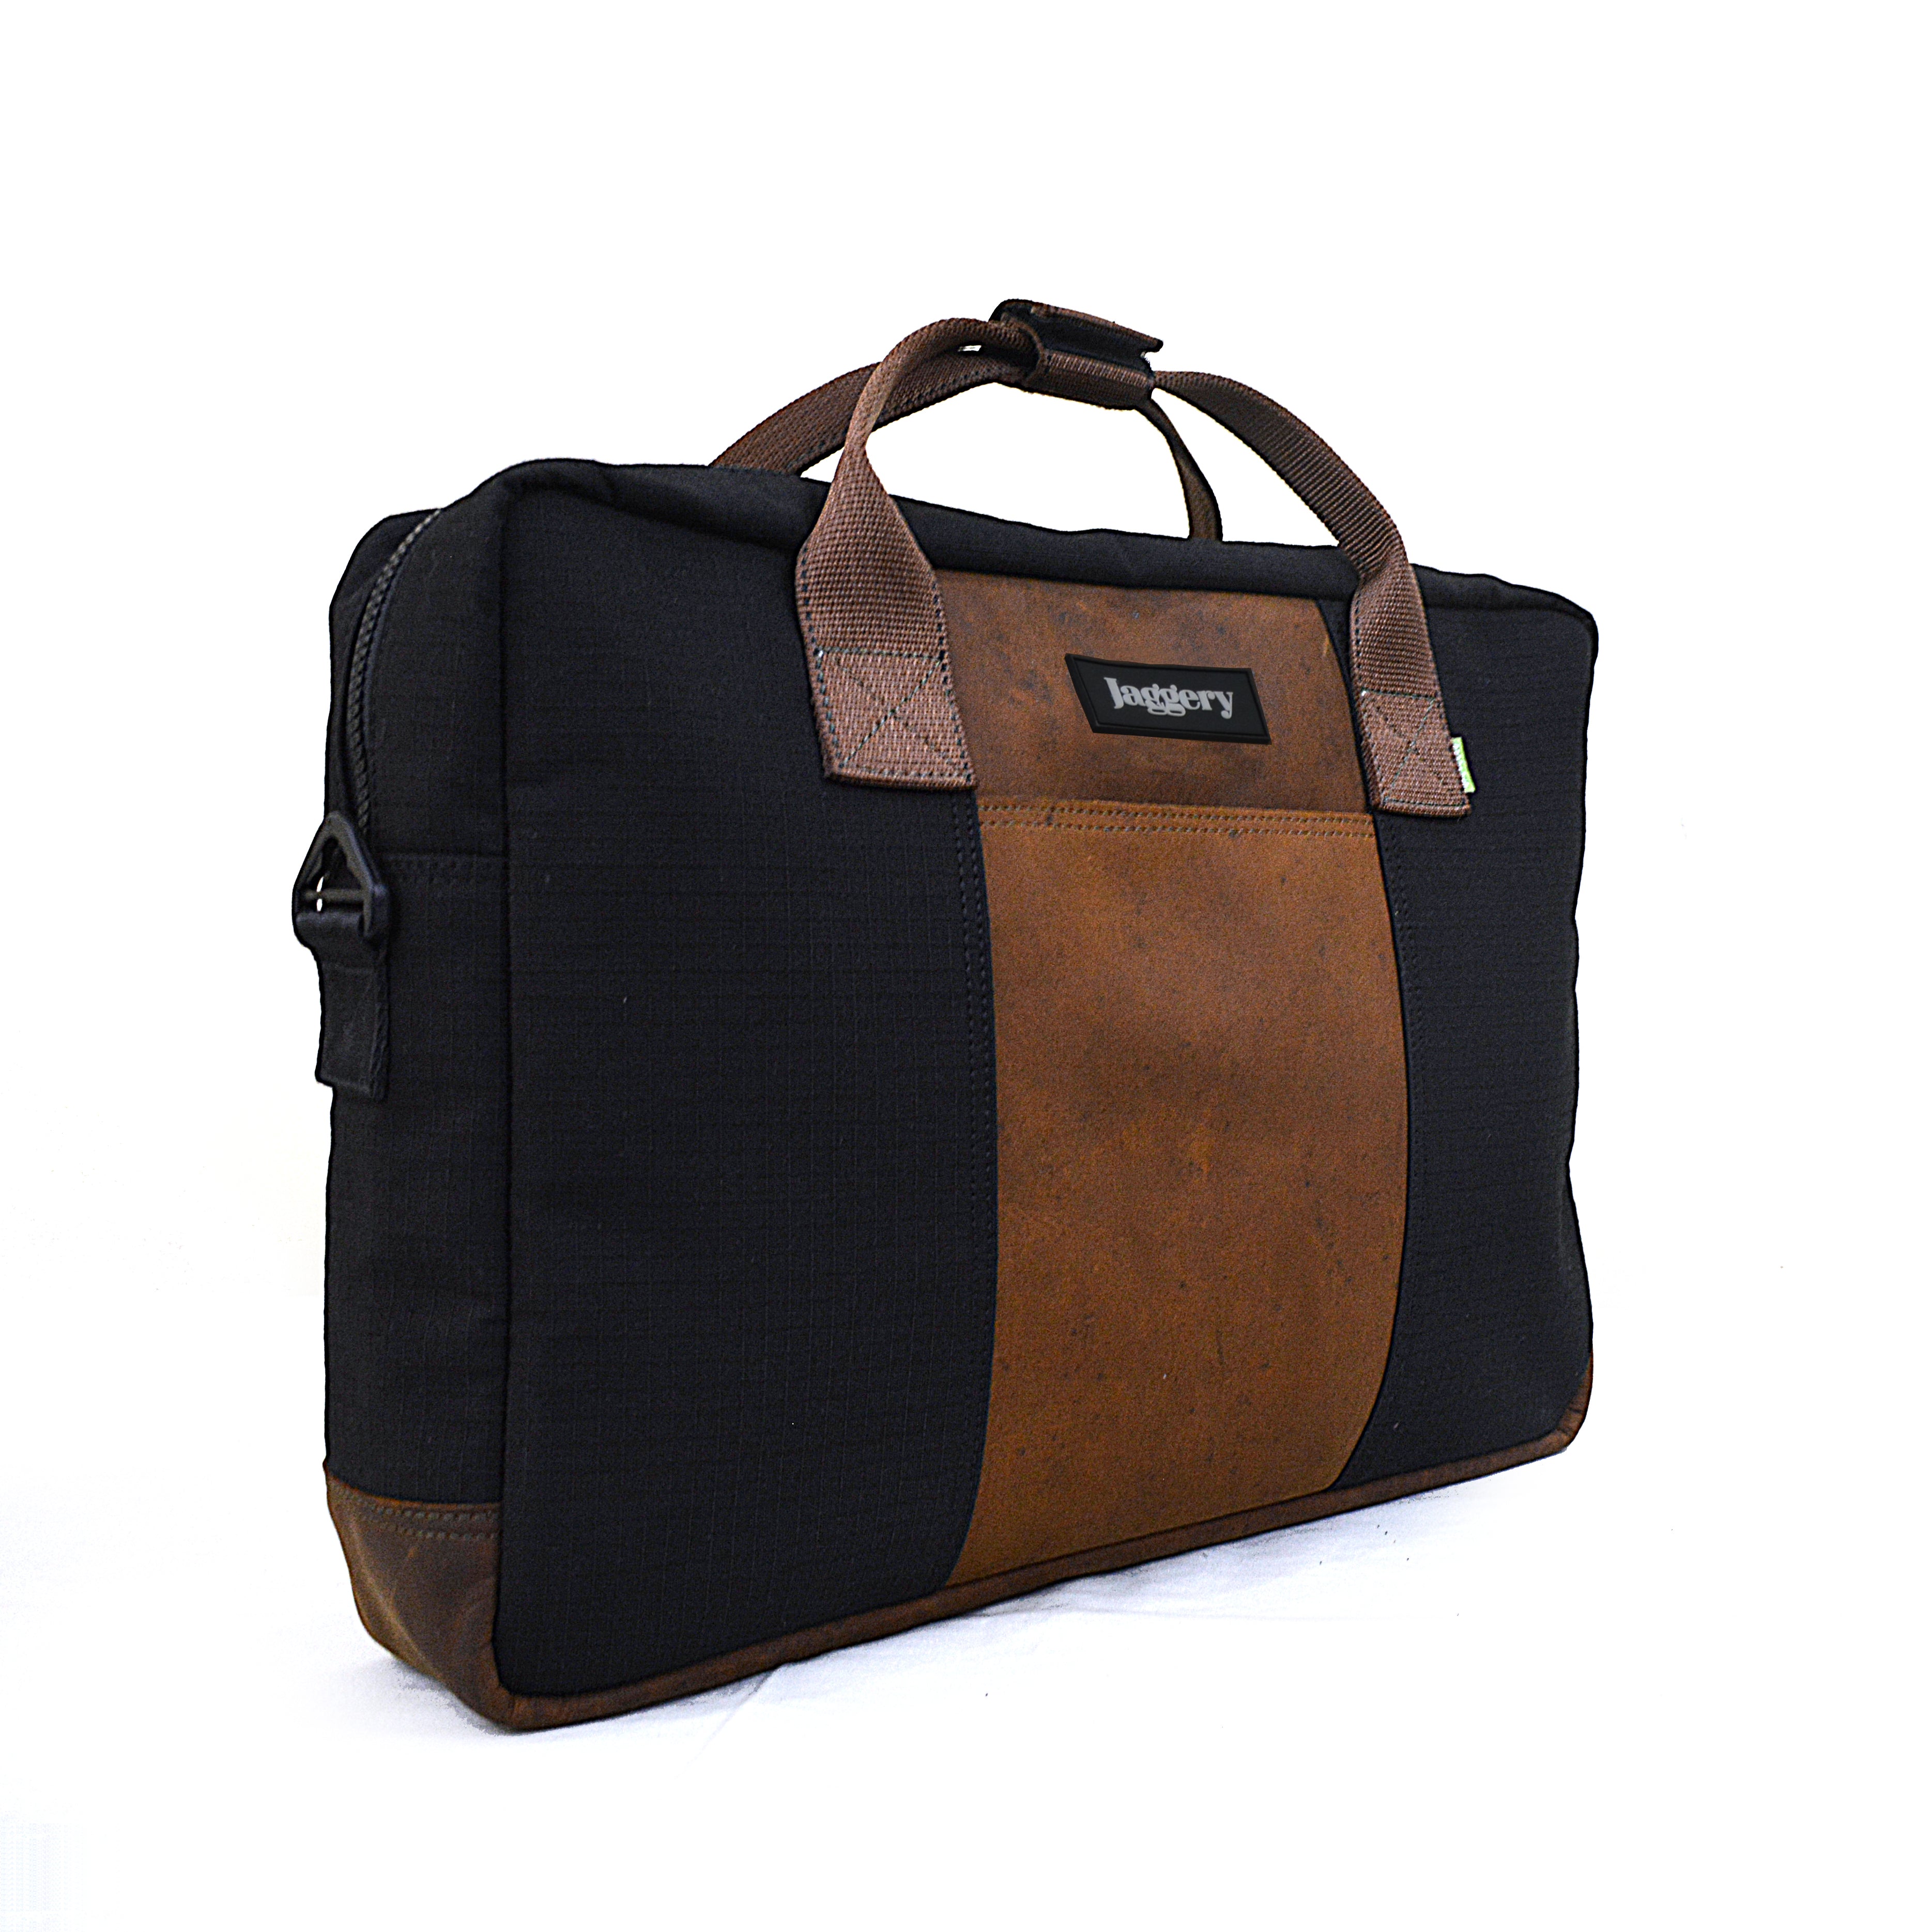 Black Cappuccino Co-founder's Bag in Black Canvas & Salvaged Nubuck [15" laptop bag]